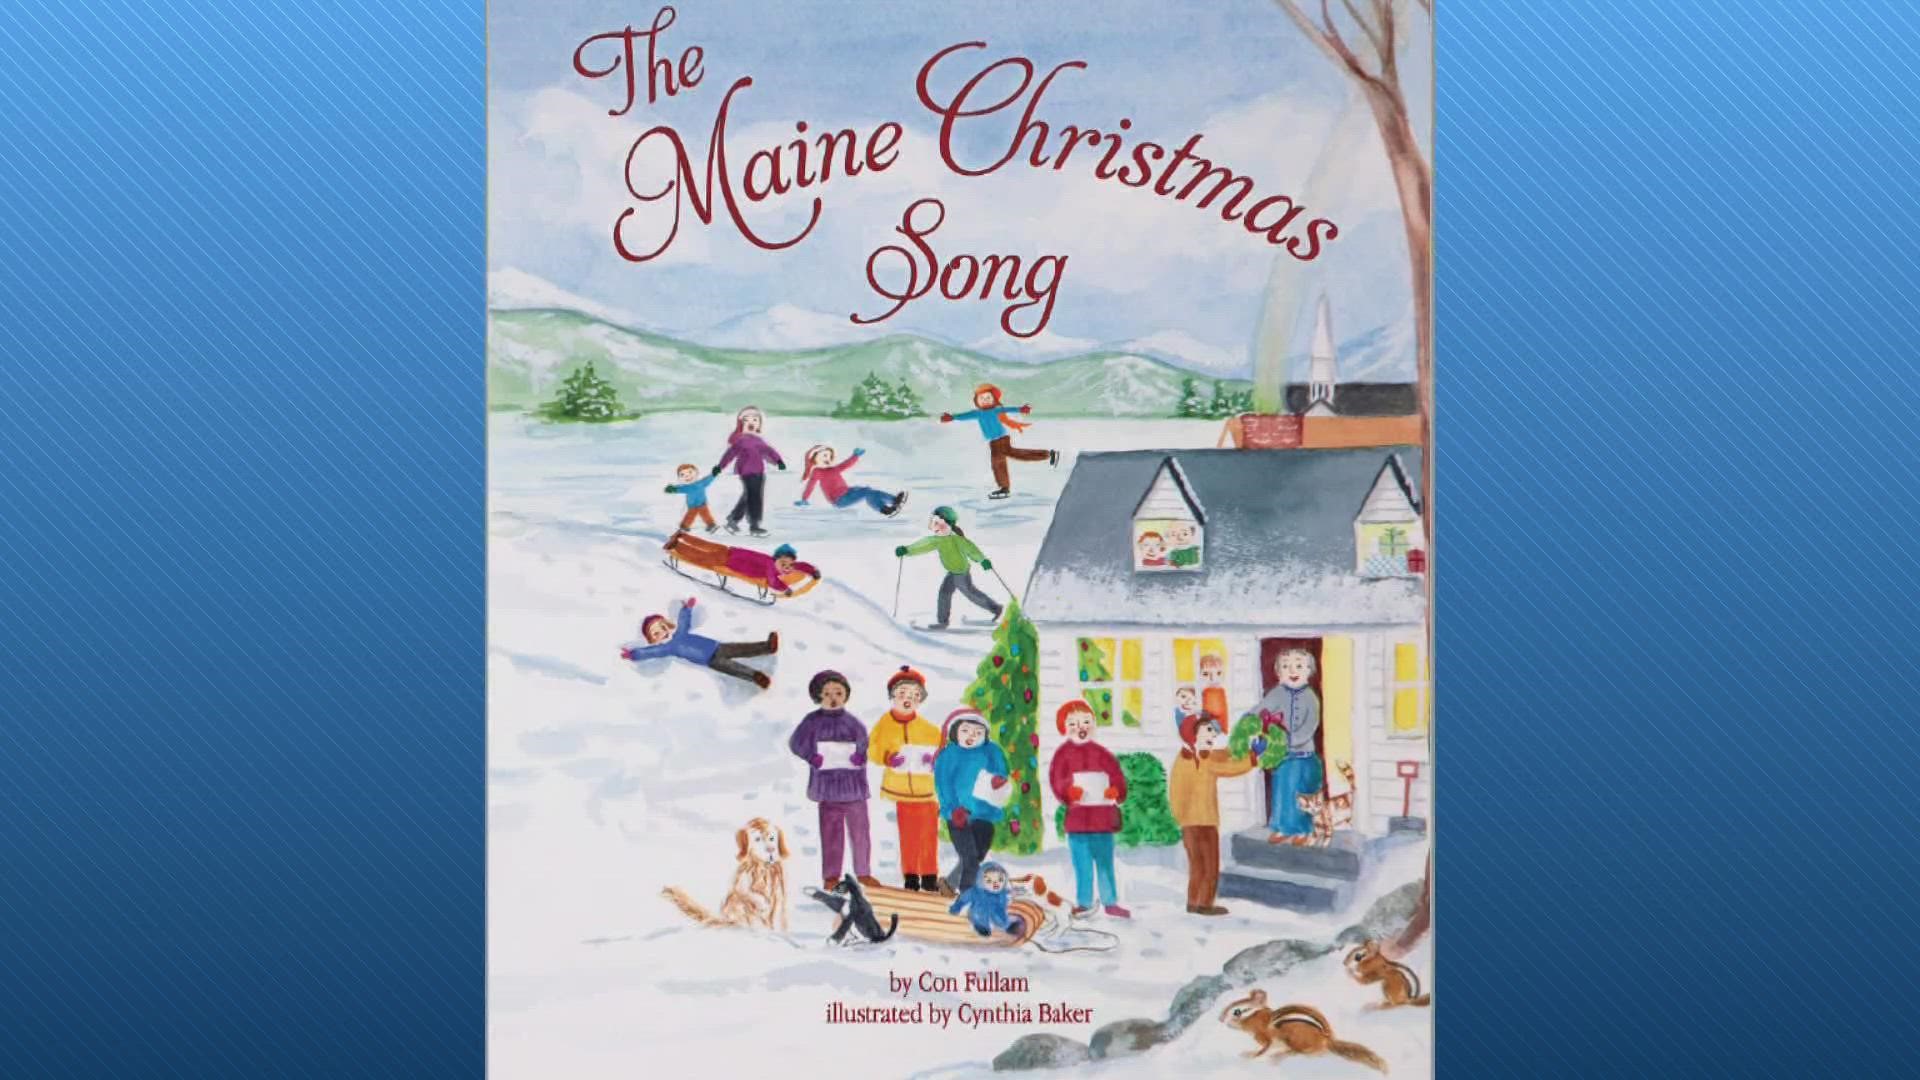 'The Maine Christmas Song' was recorded 35 years ago. It's now reaching new Maine children through a picture book.